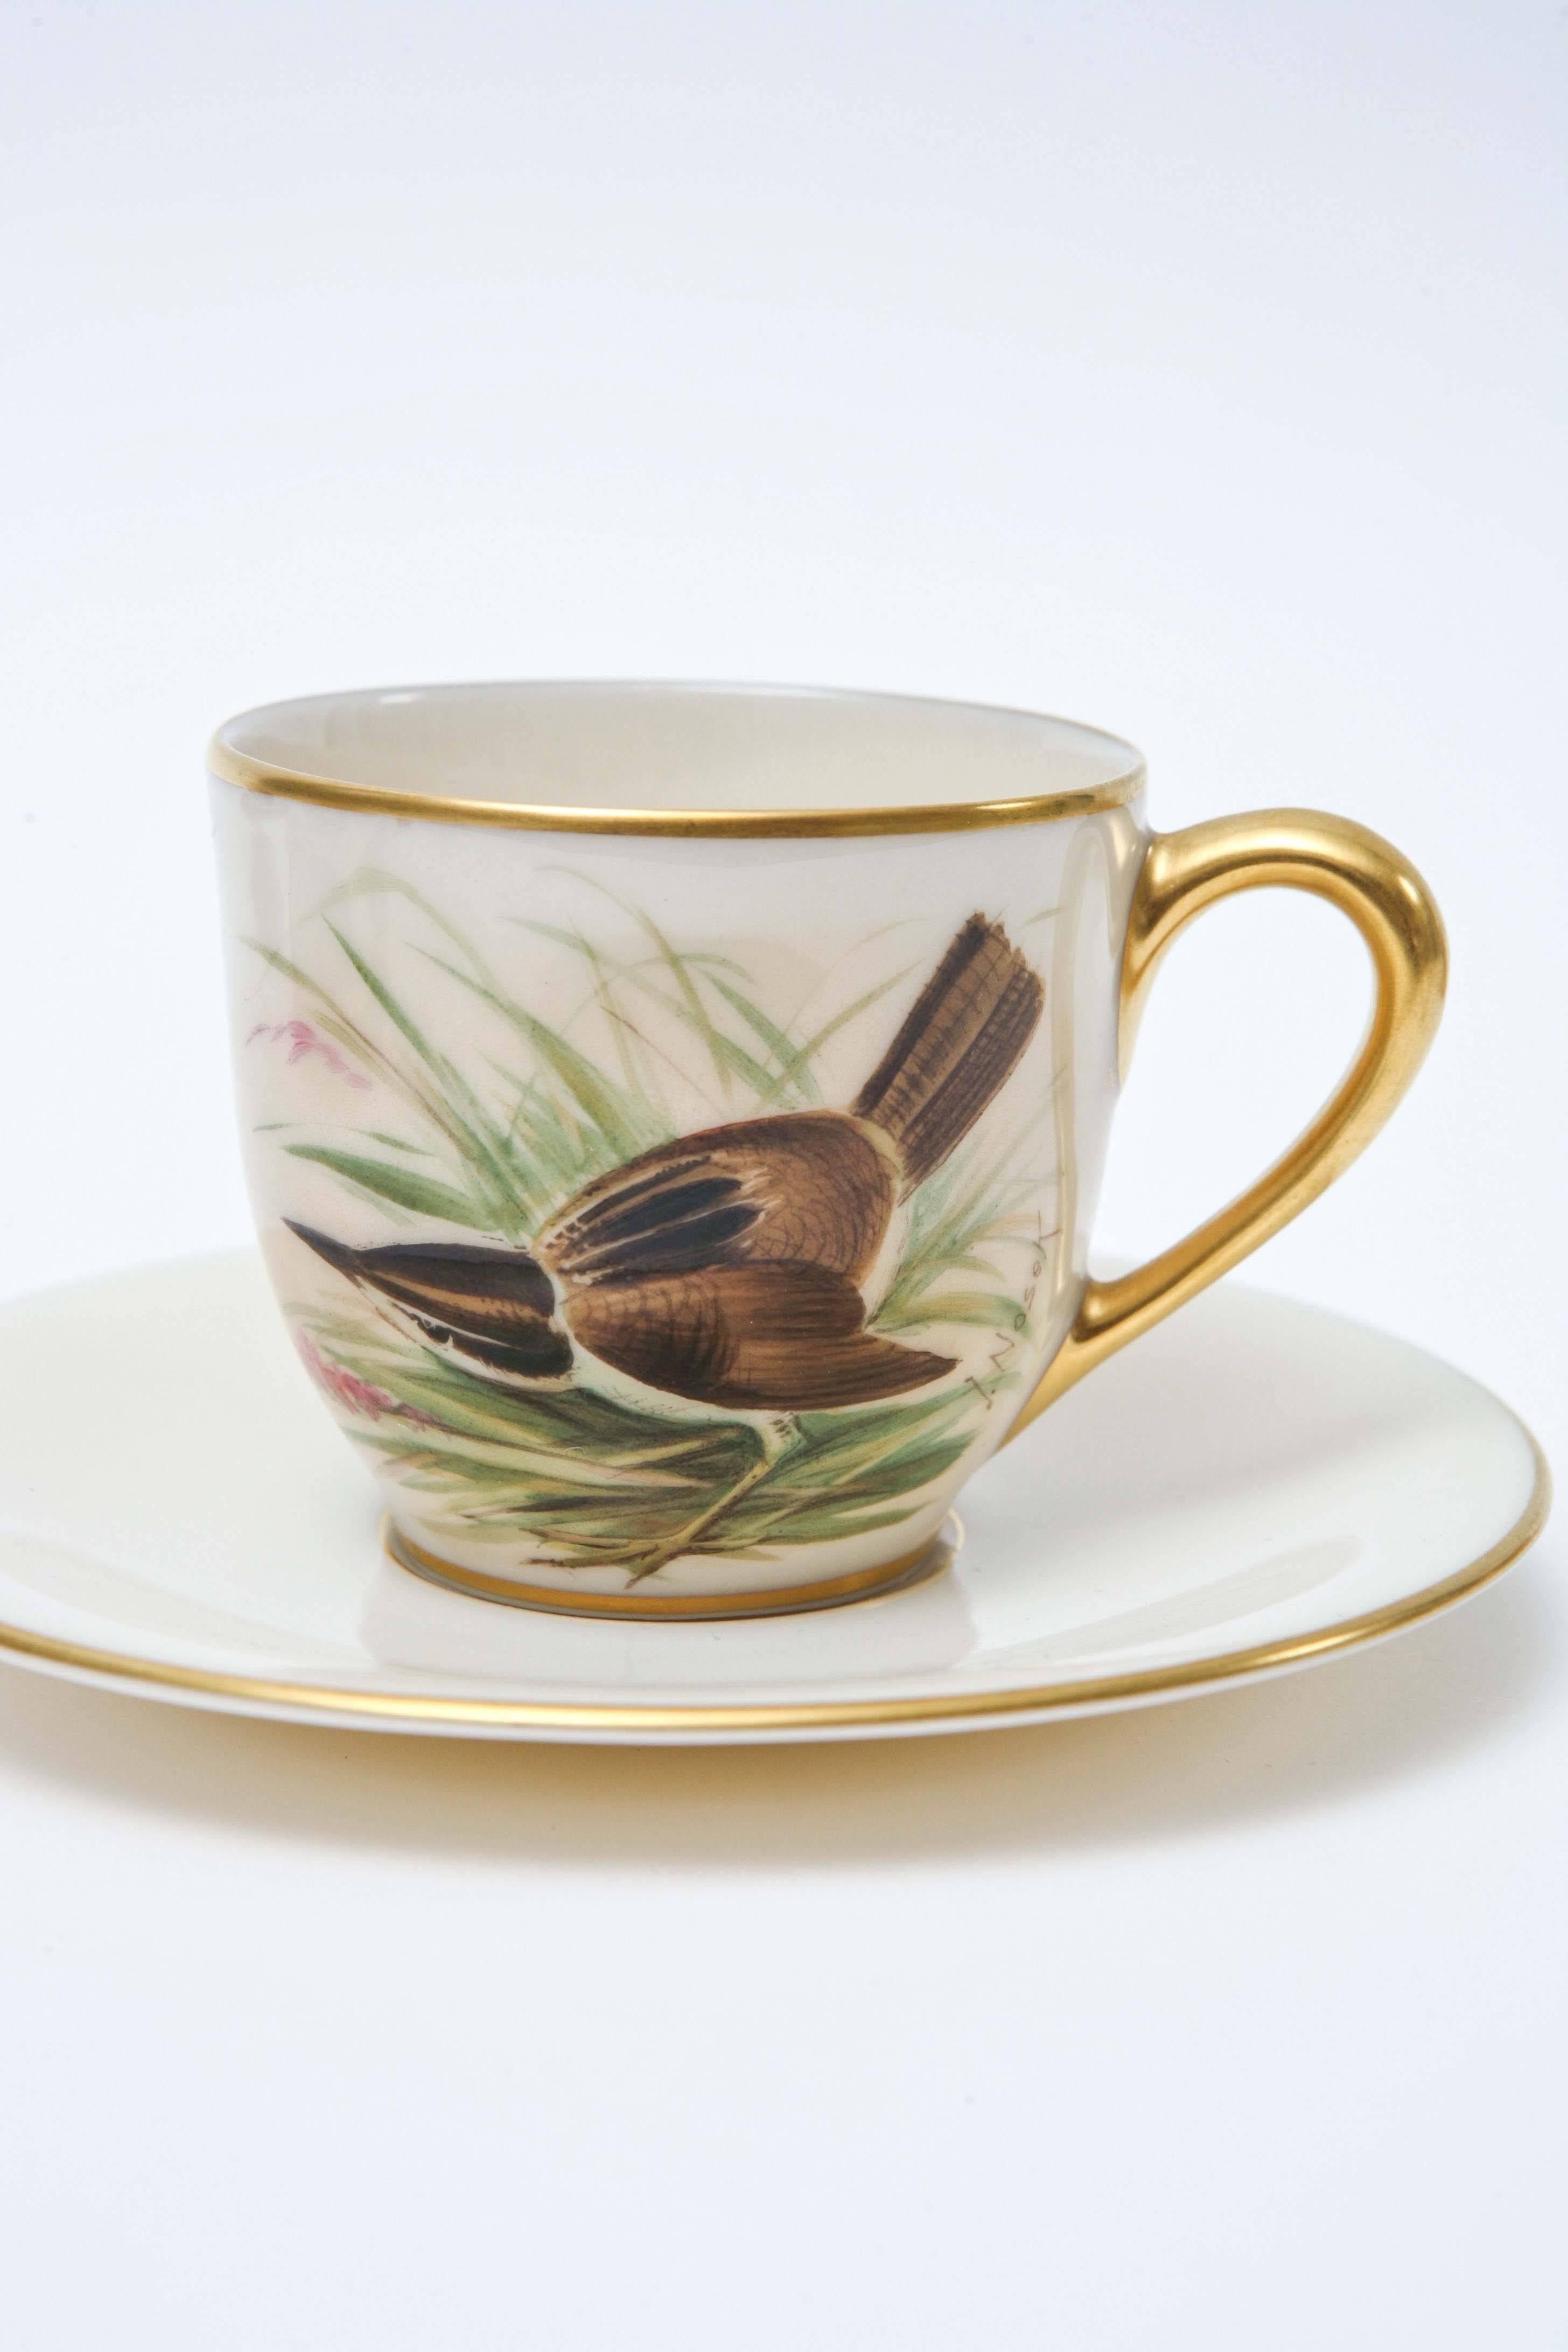 American Six Charming Hand-Painted Song Bird Cup and Saucers, Vintage Lenox